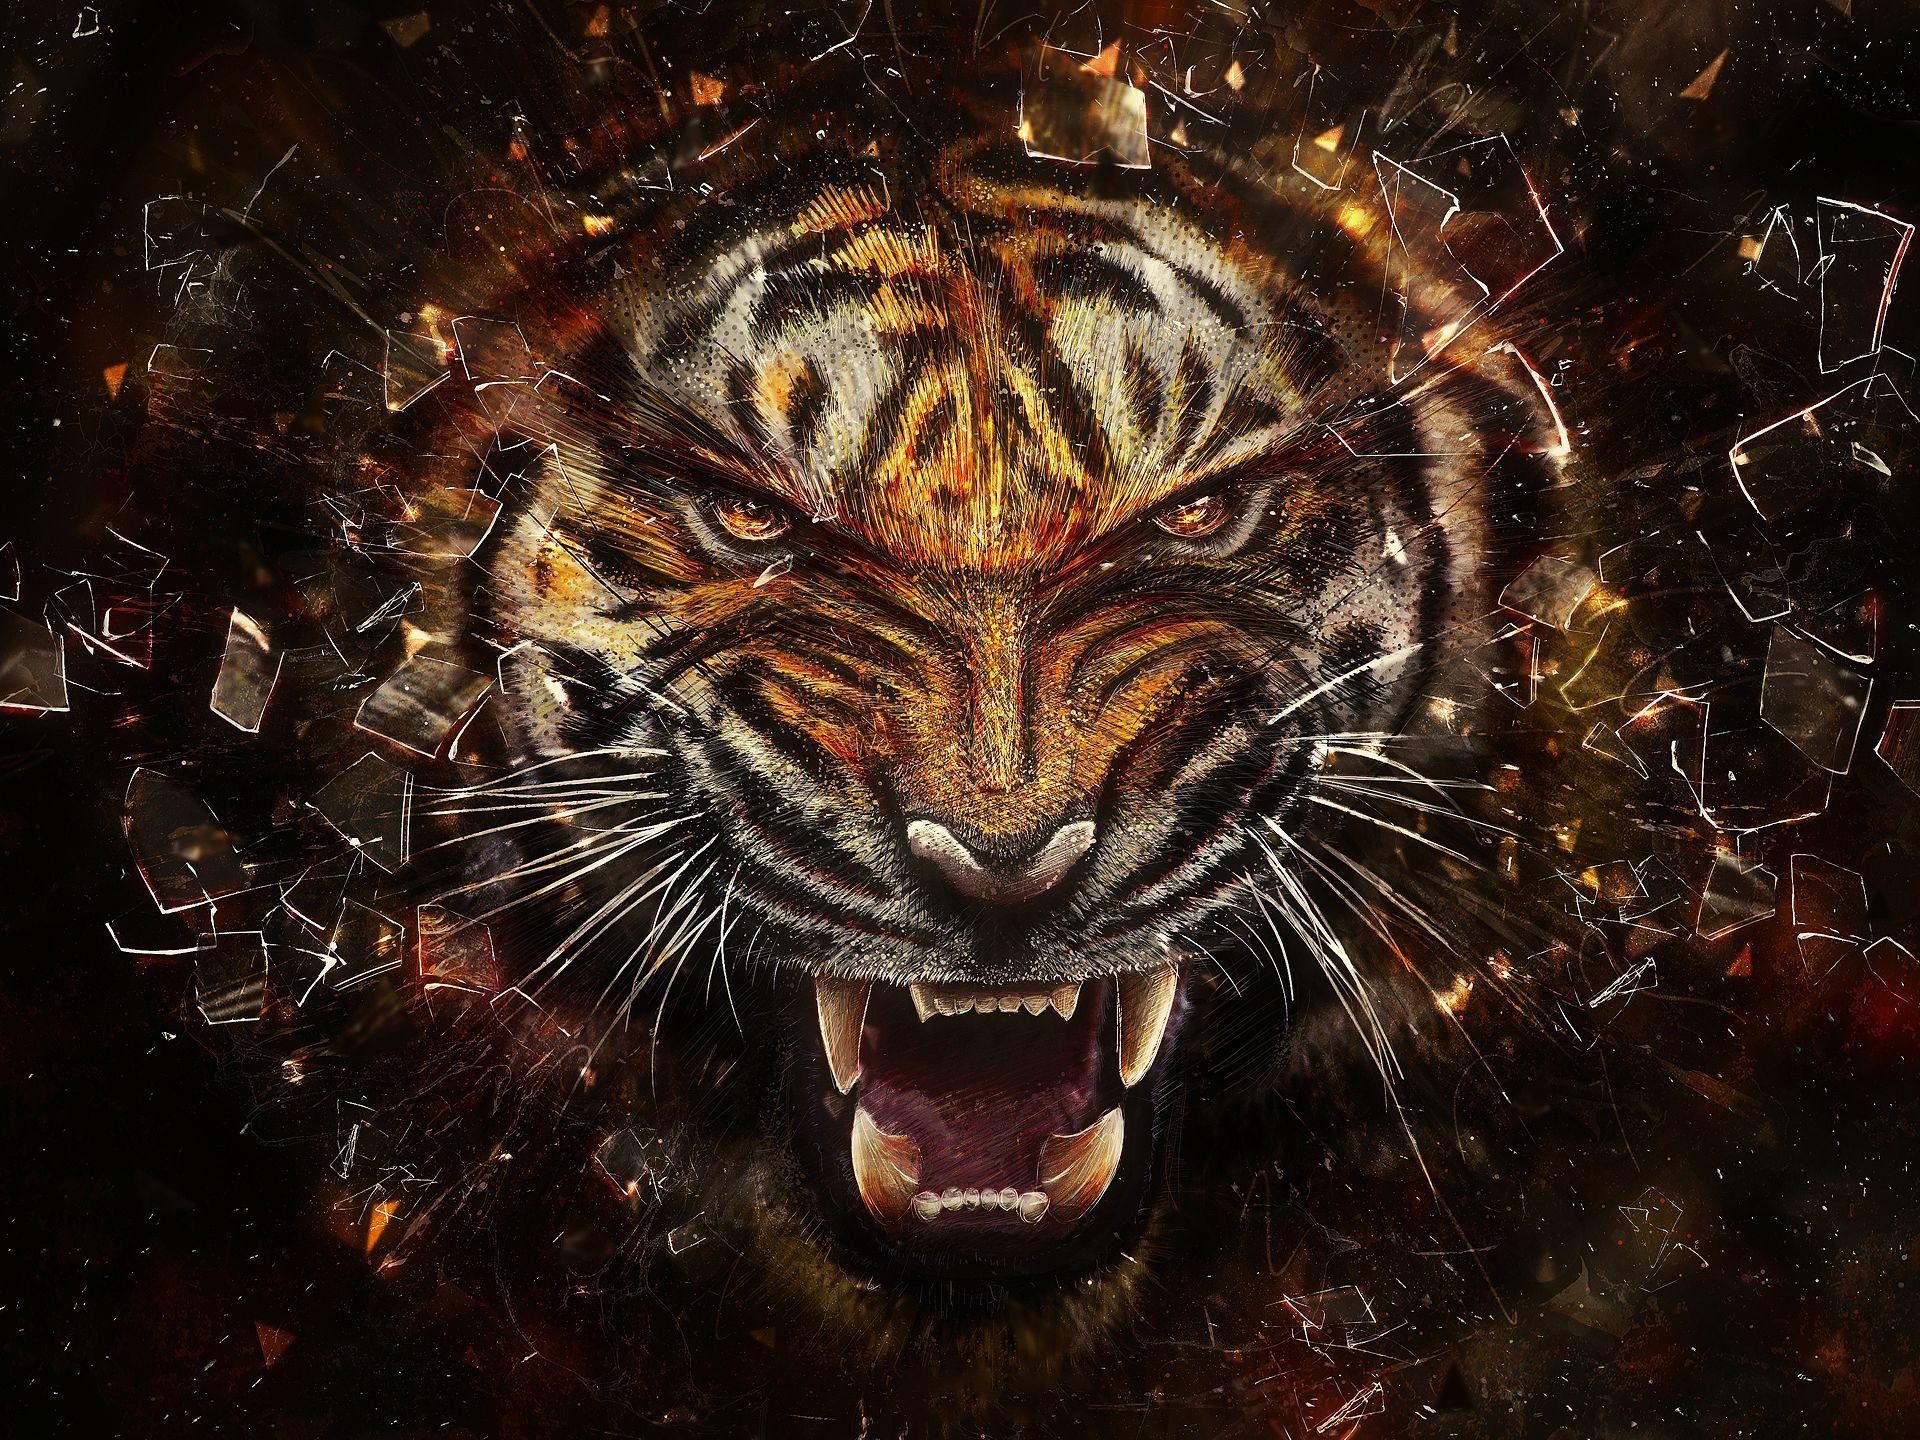 Tiger wallpapers in hd